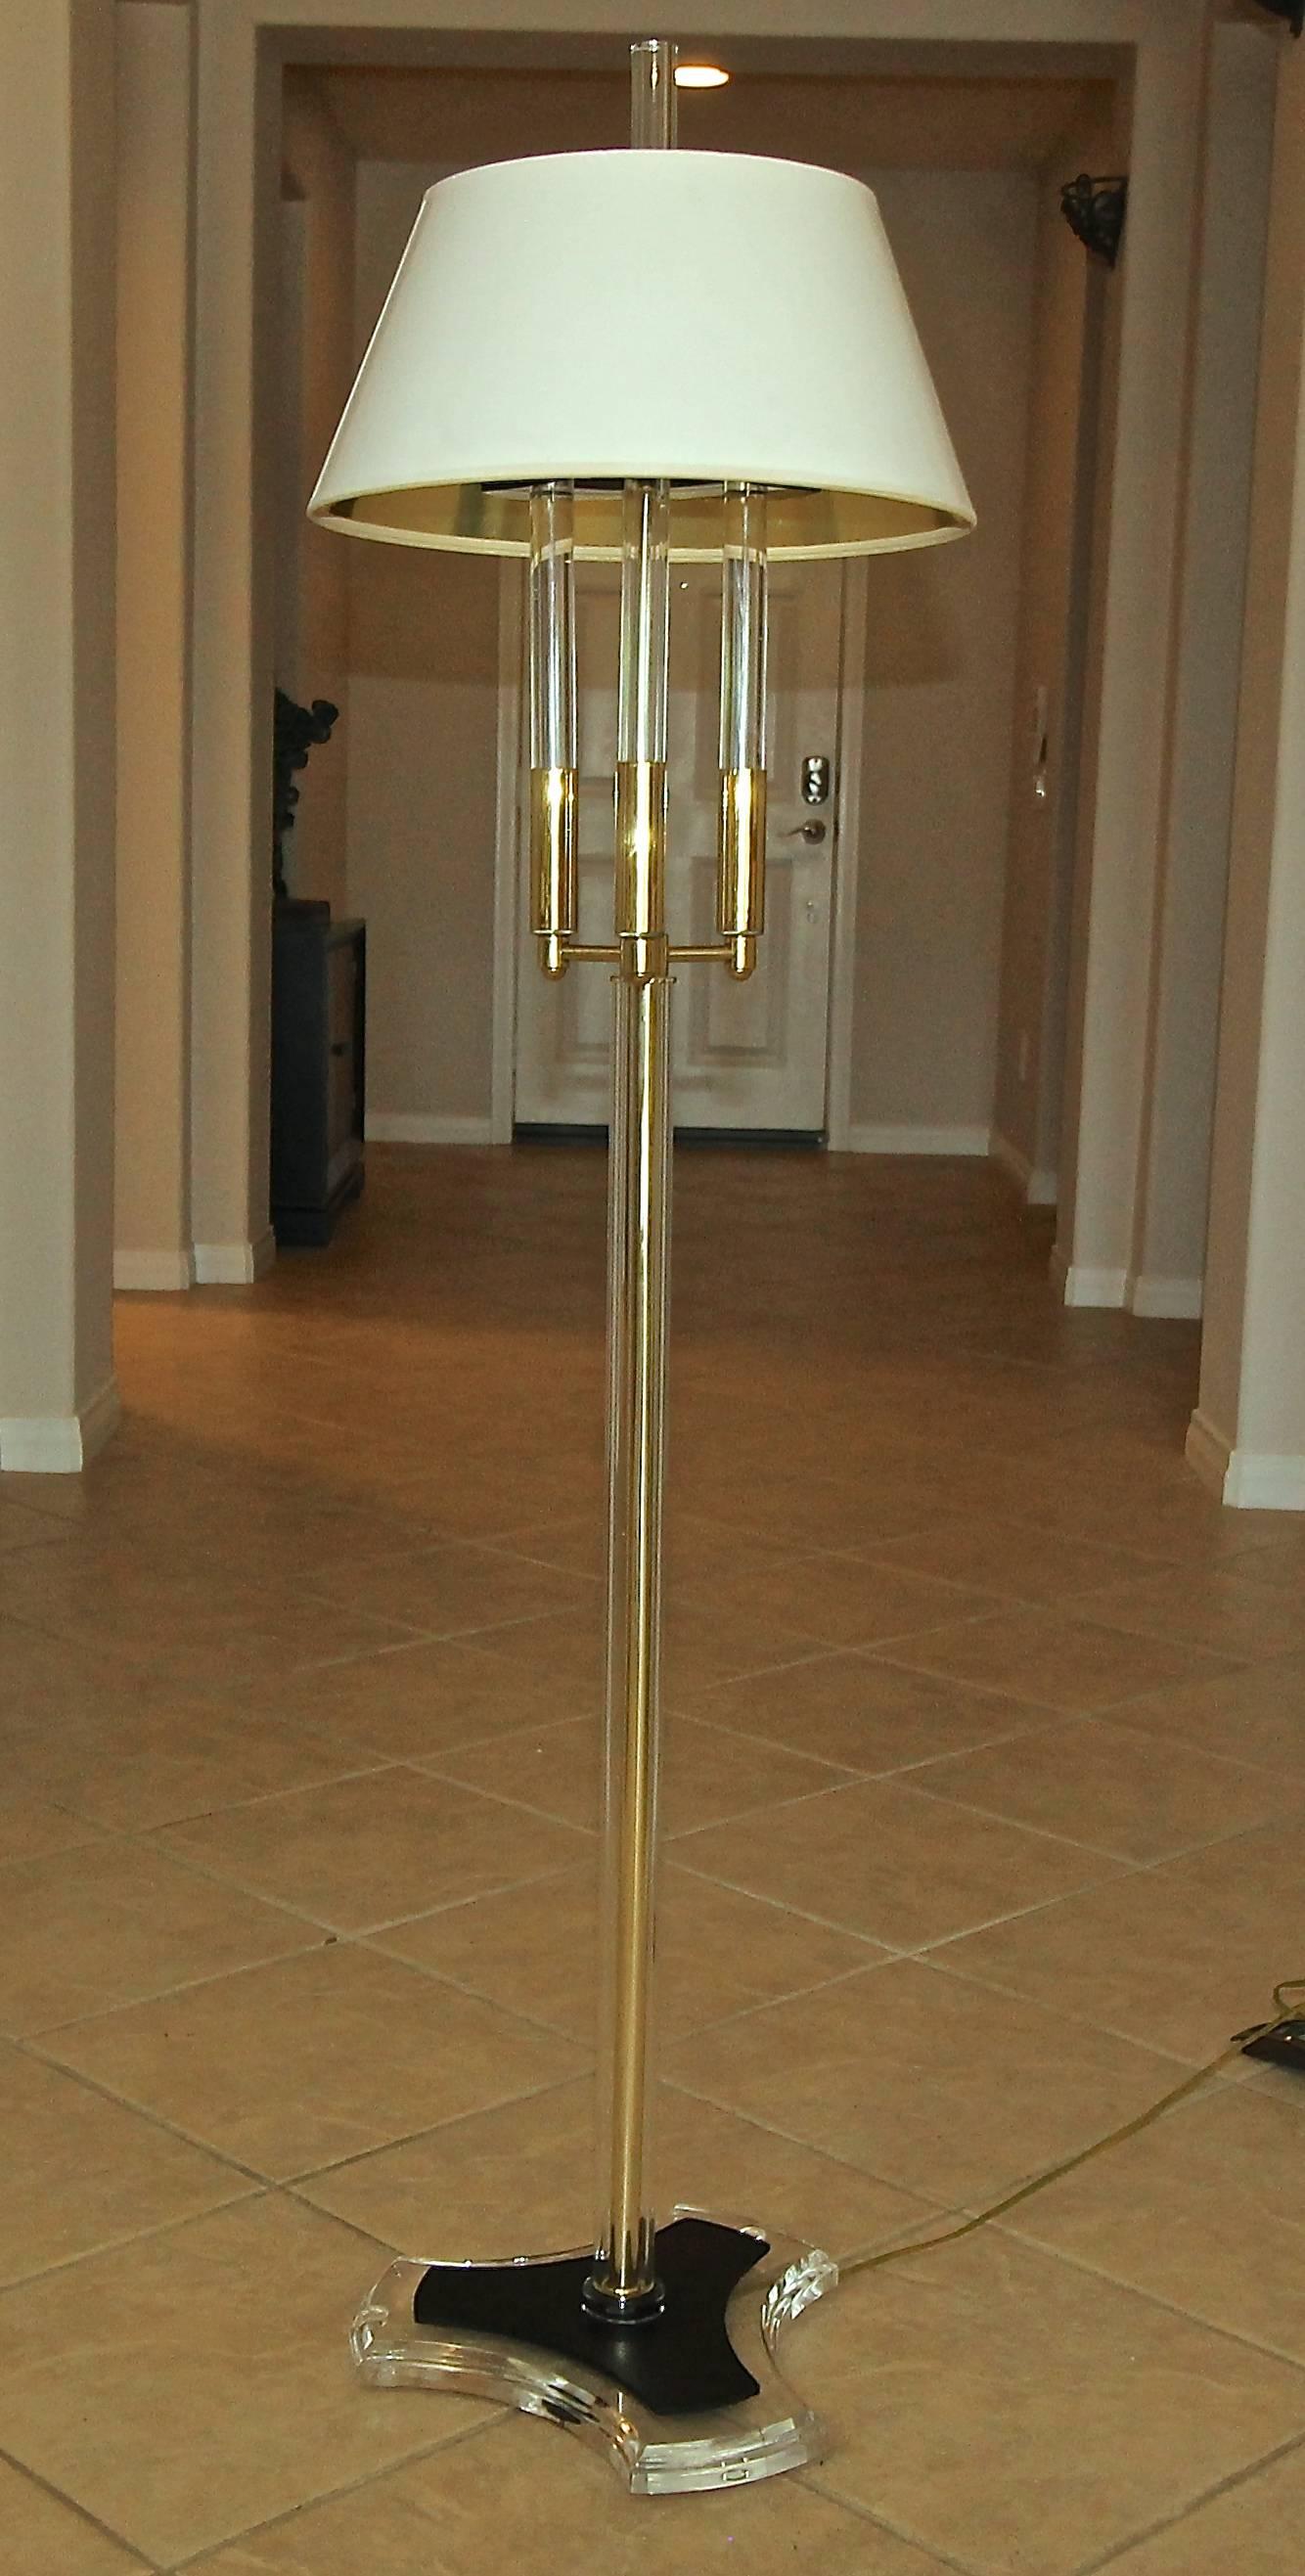 Modern brass and acrylic floor lamp. Uses two regular A base bulbs with on/off switch on cord. Nicely detailed with dark acrylic accents and decorative brass arms with clear acrylic stems. Shade not included for photography purposes only.